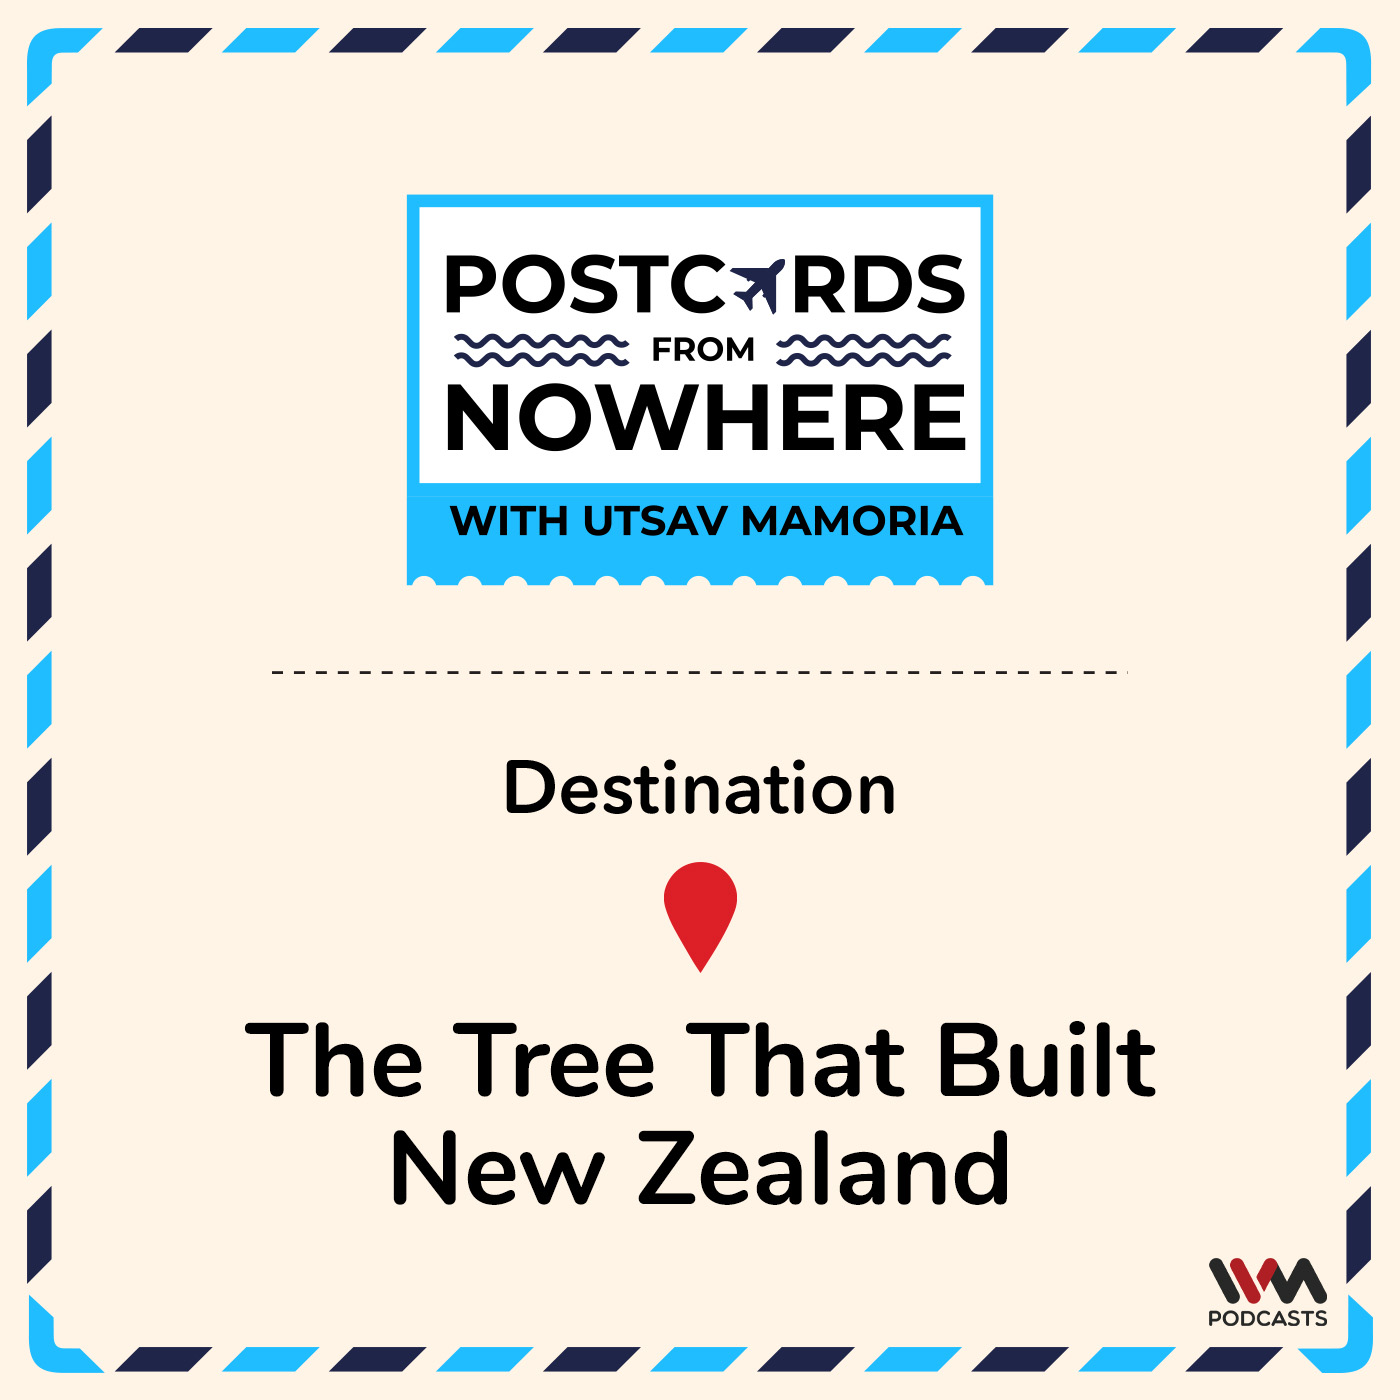 The tree that built New Zealand